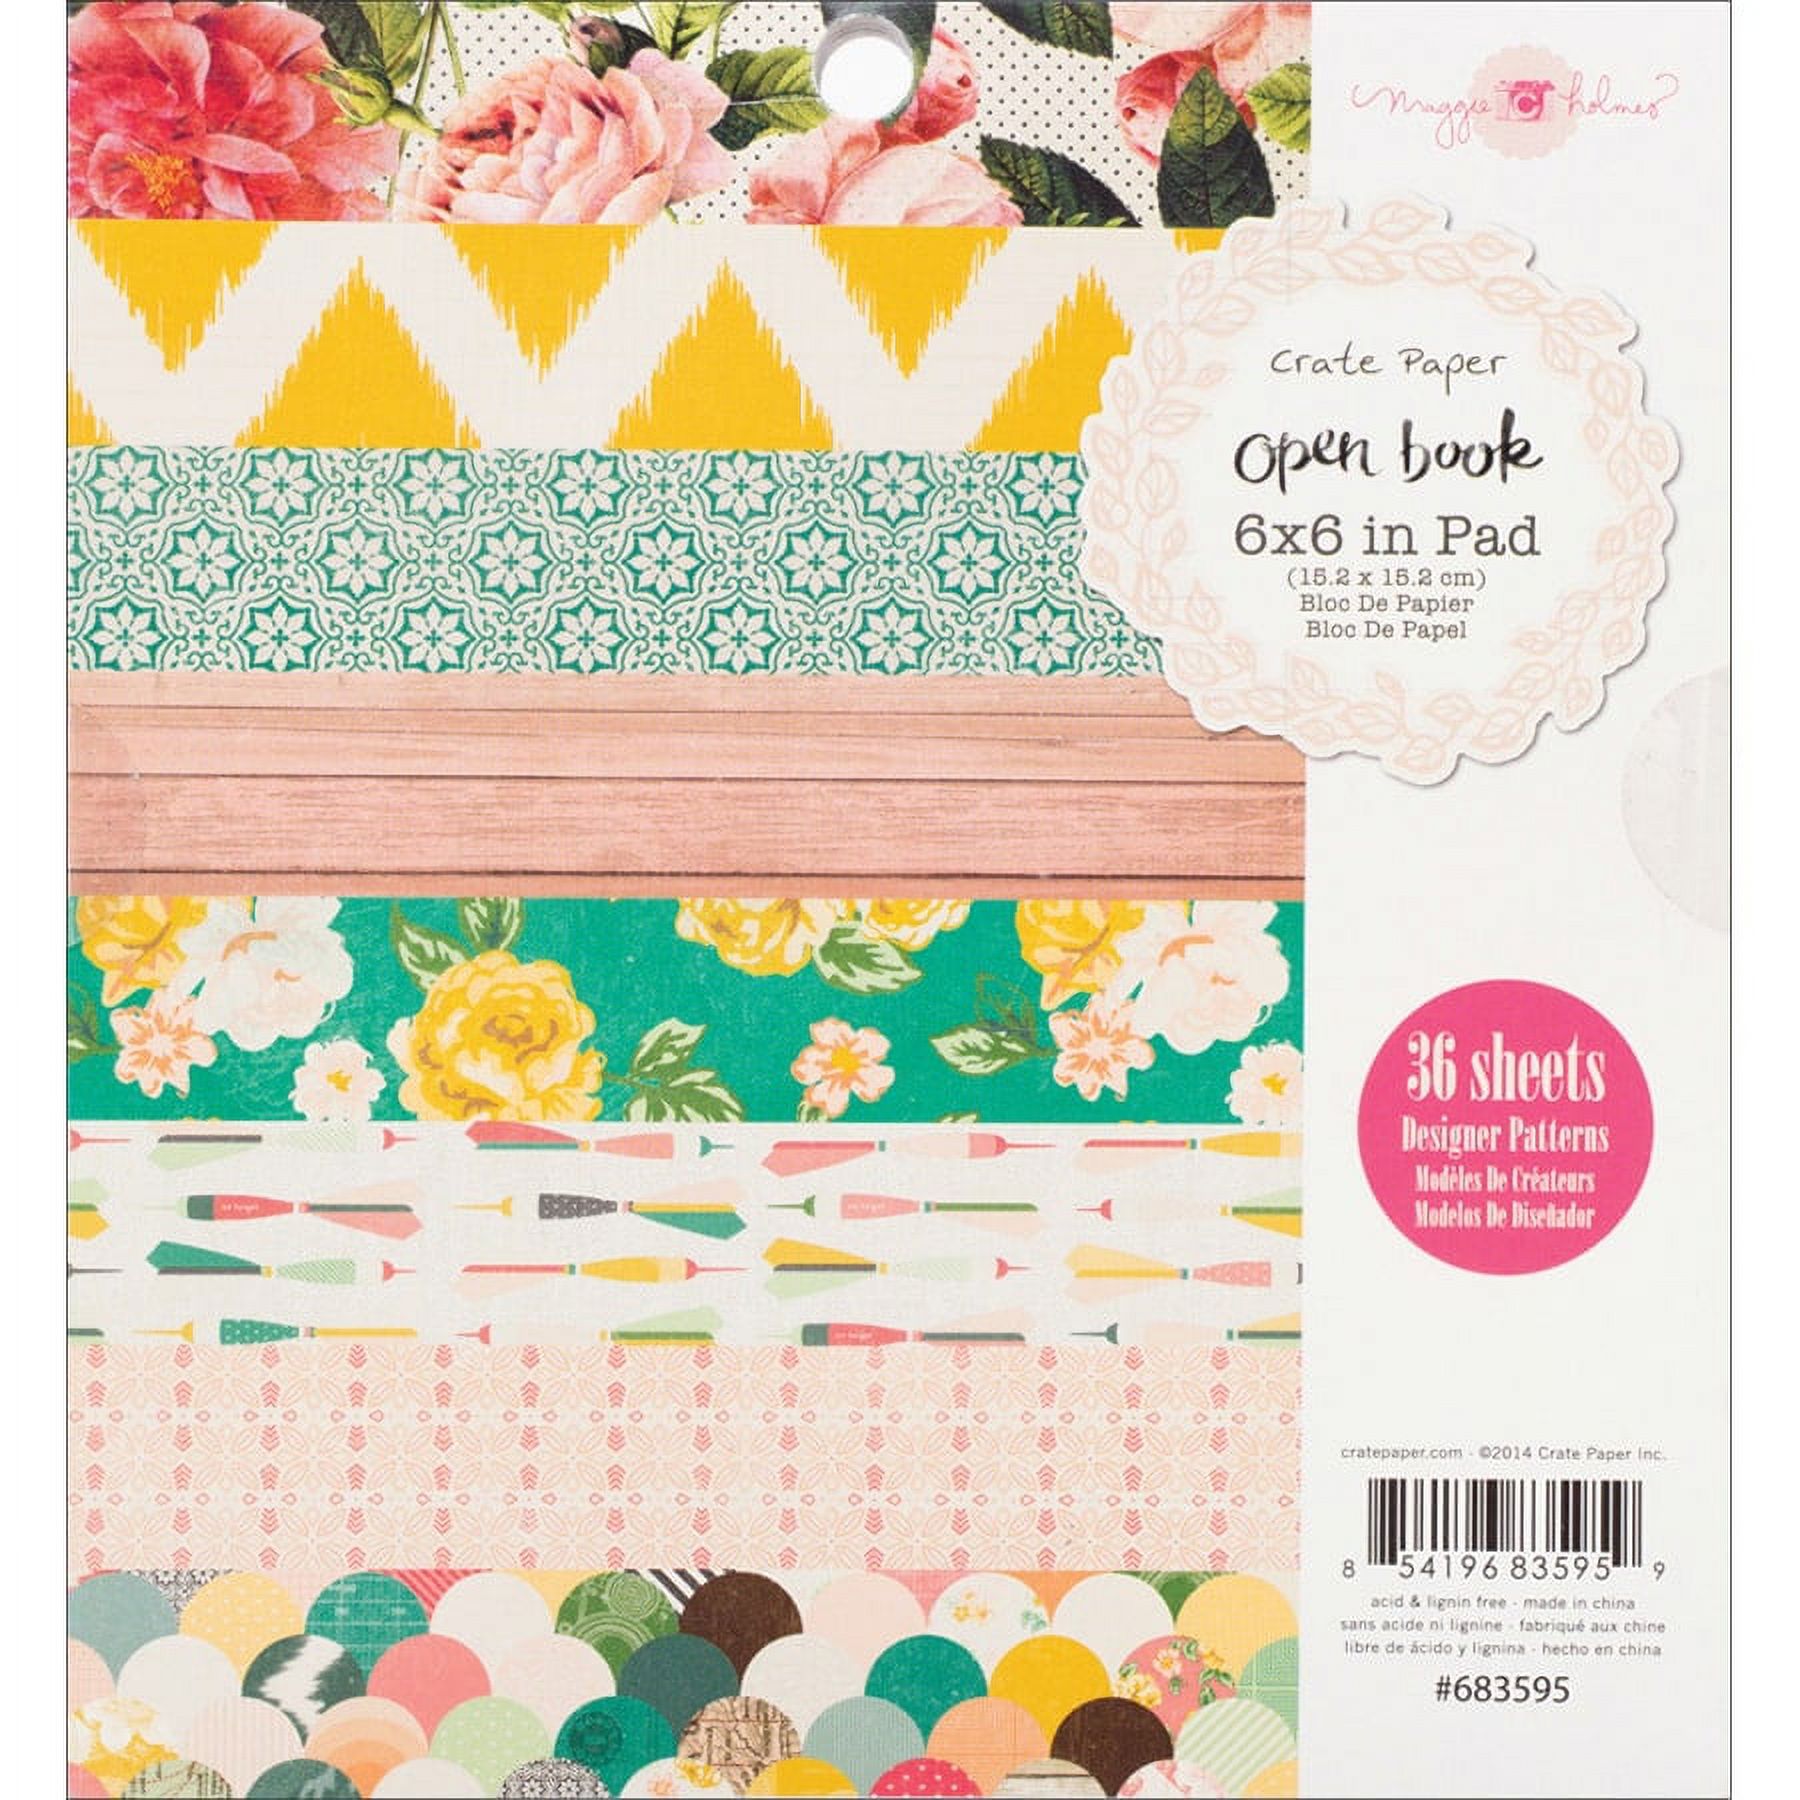 American Crafts Crate Paper Paper Pad 6"X6" 36/Pkg-Maggie Holmes Open Book - image 2 of 2